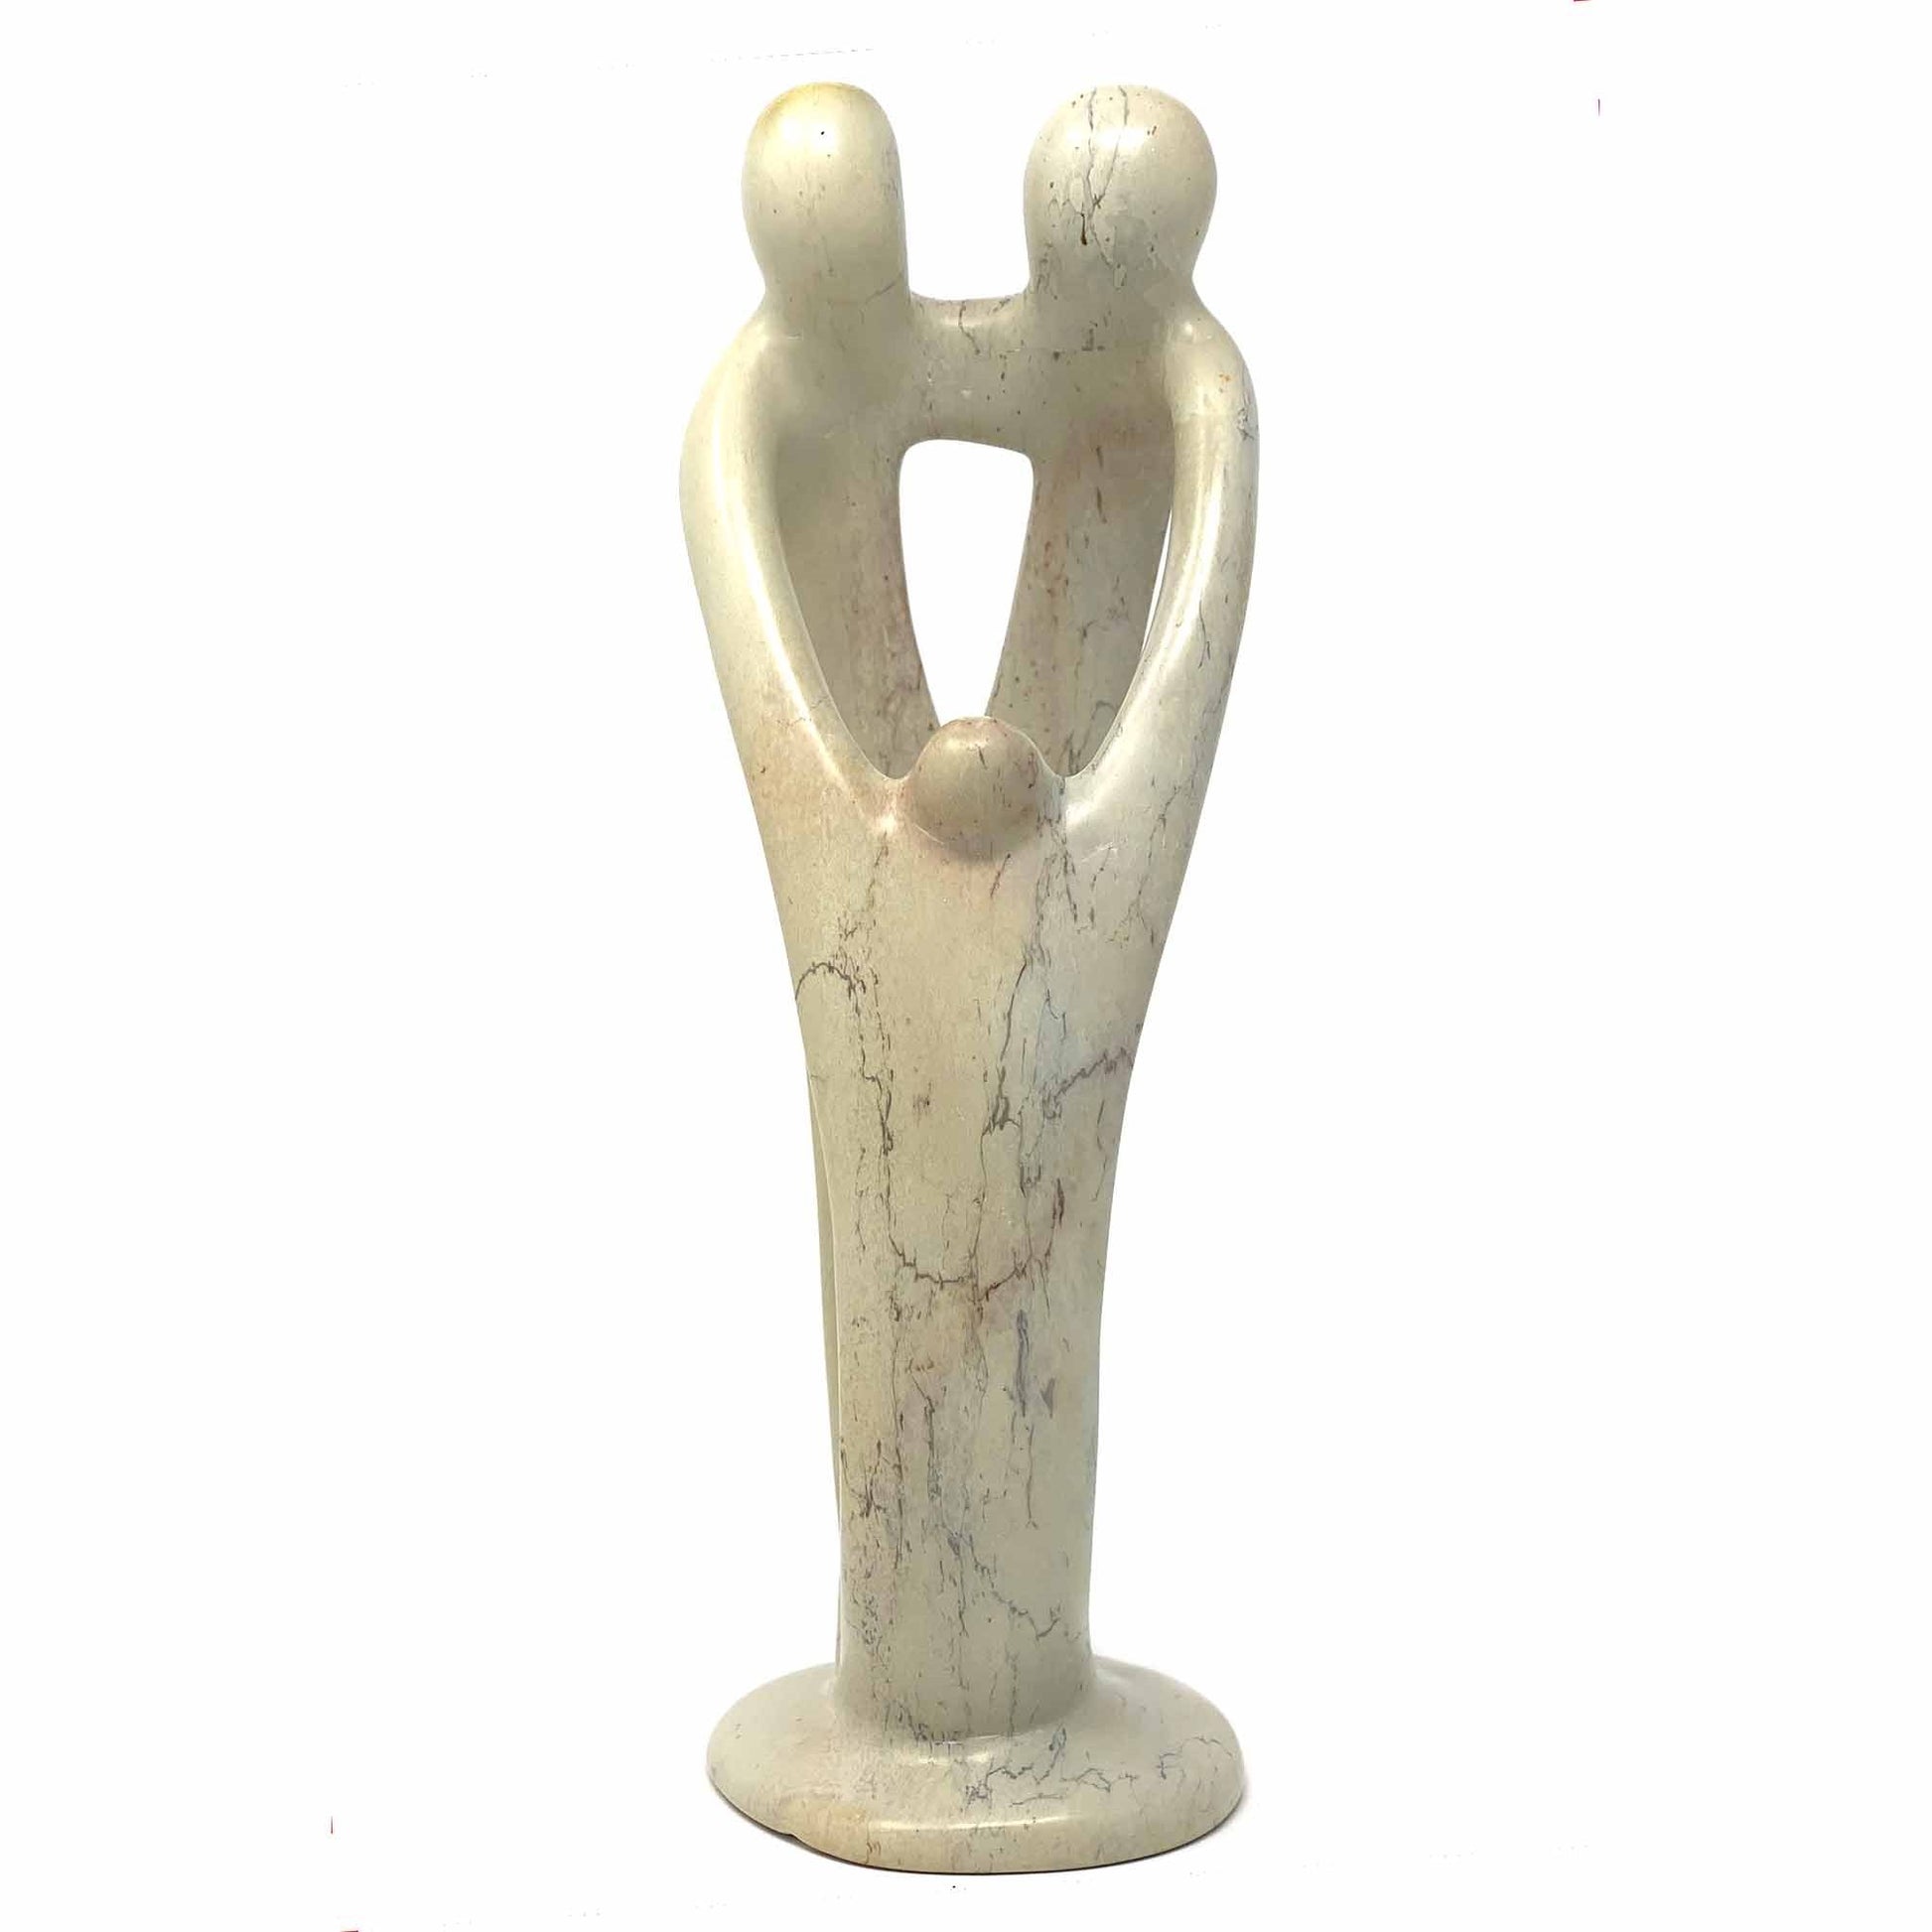 Natural 8" Soapstone Family Sculpture; 2 Parents, 1 Child - Linda Kay Gifford’s - Those Nasty Women TALK! by SWEETSurvivor